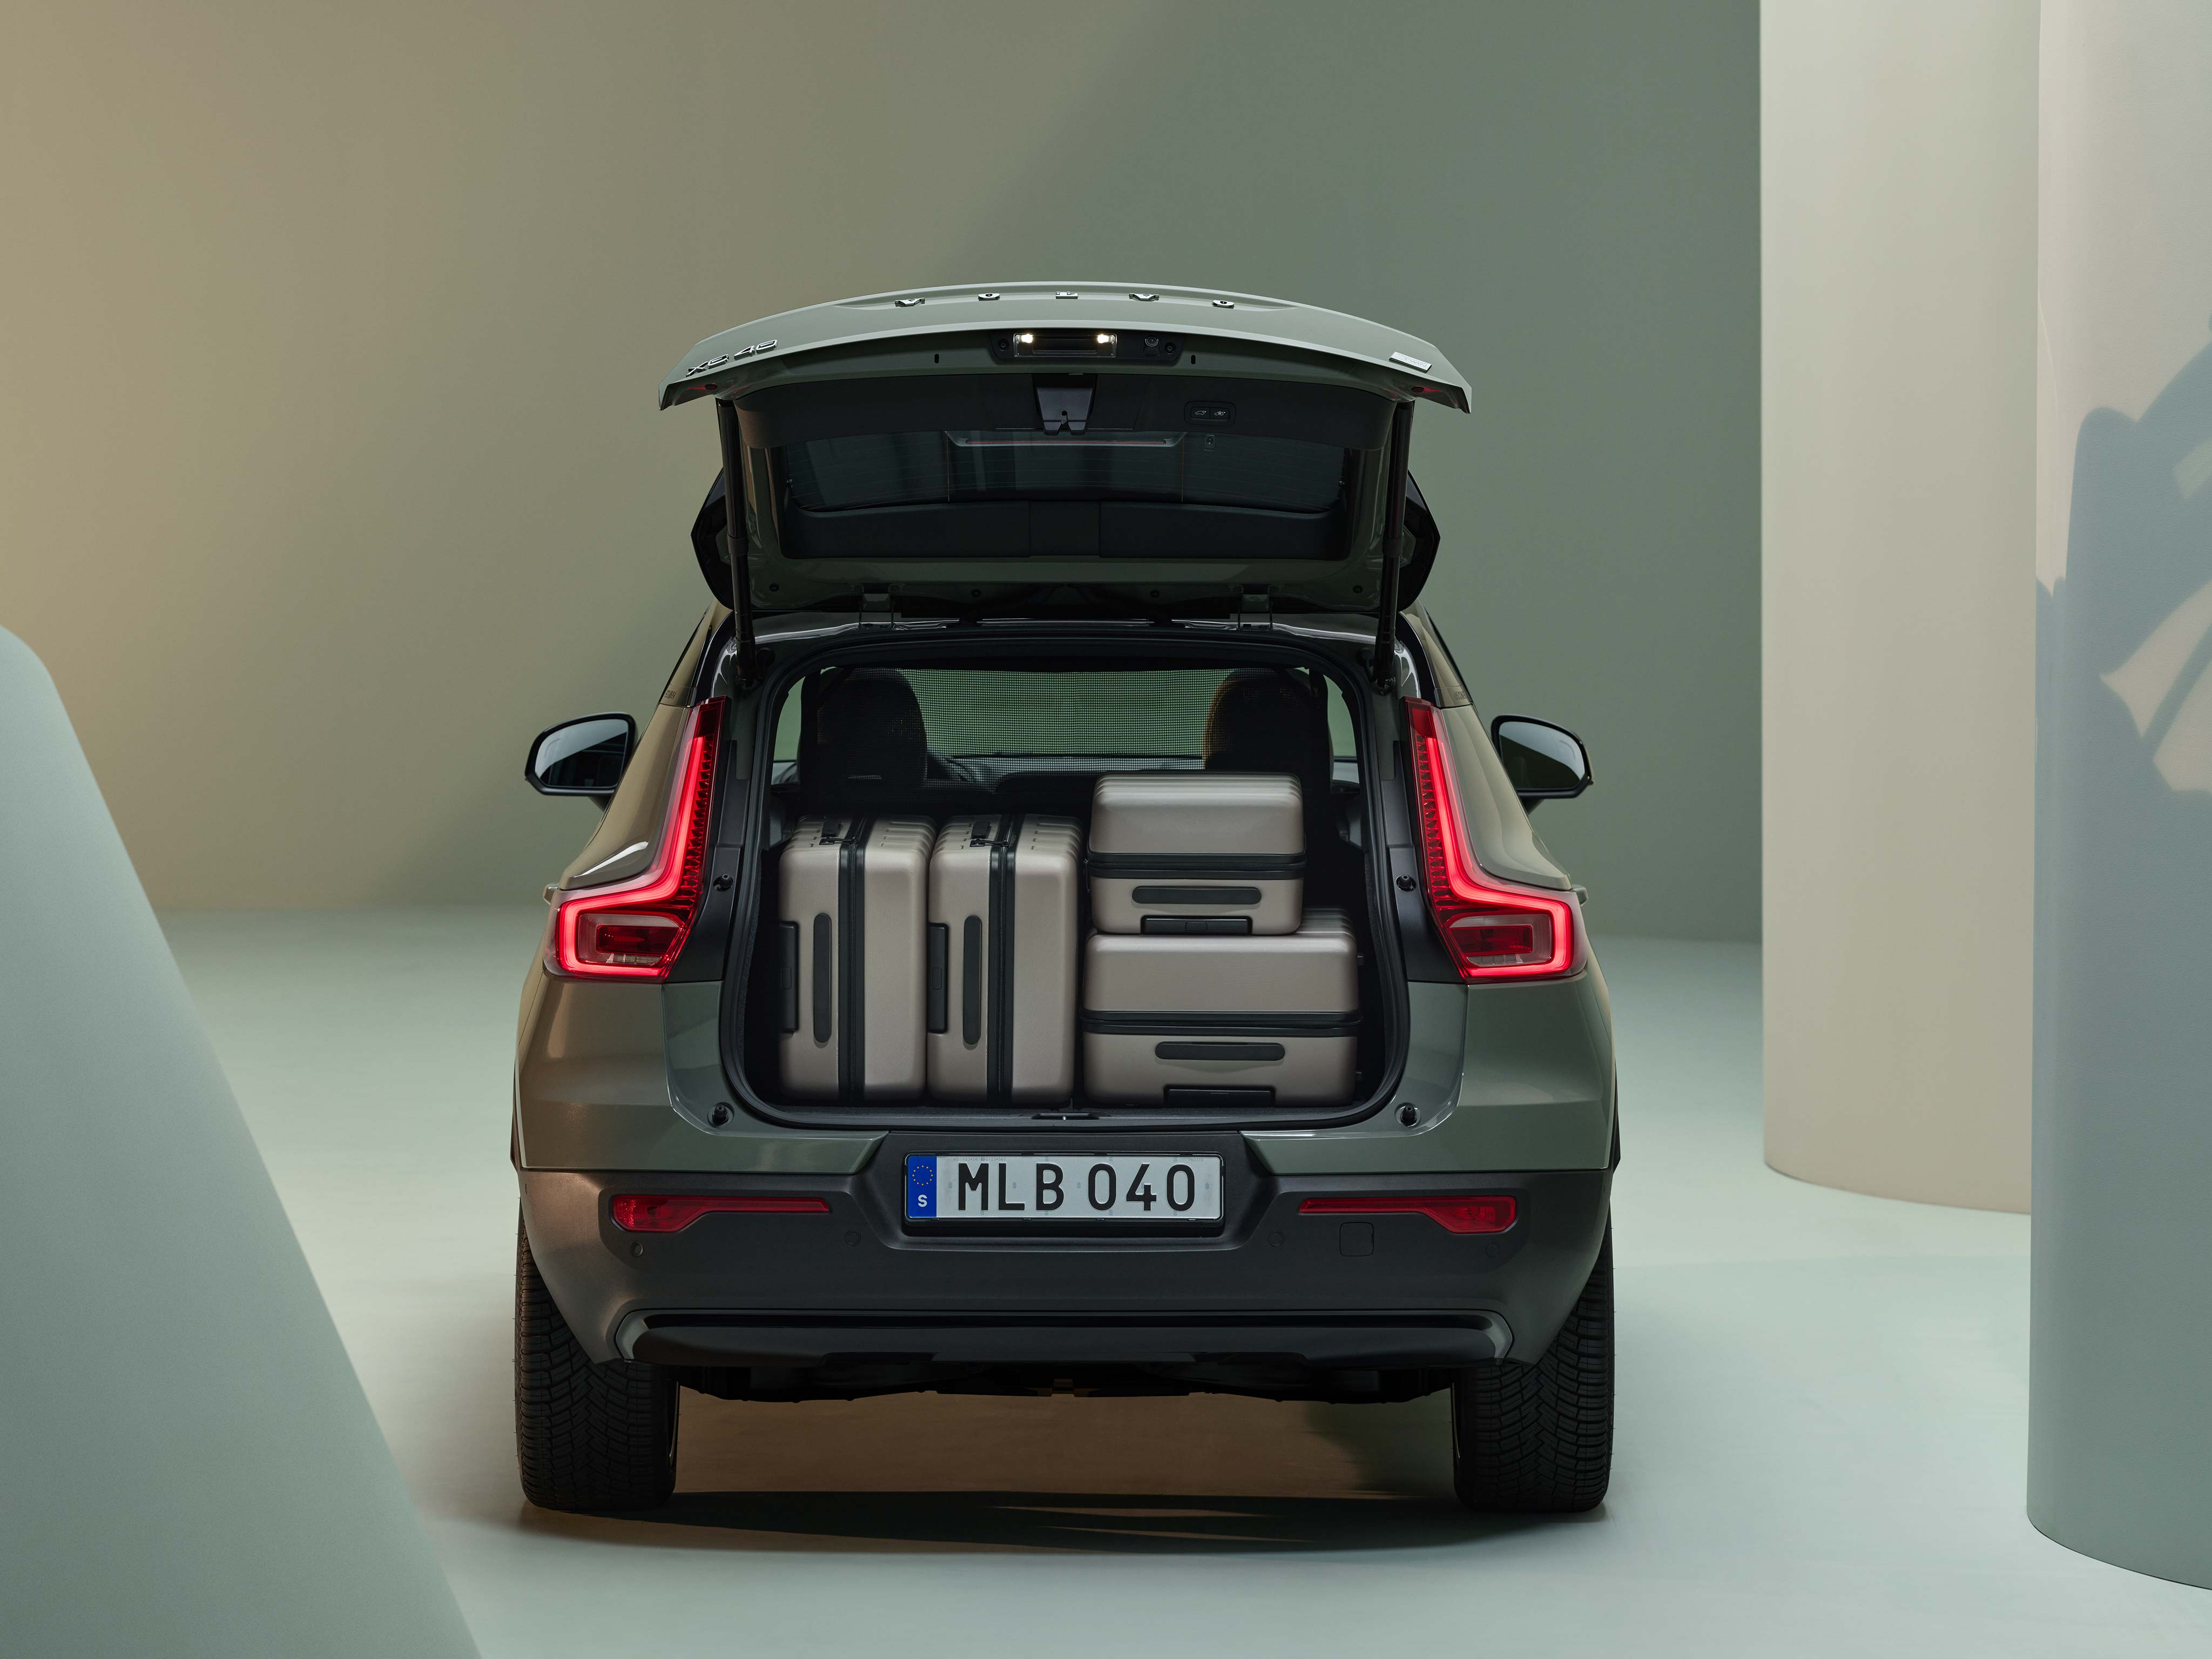 A rear view of a Volvo SUV’s large load compartment and its haul of several big cases.